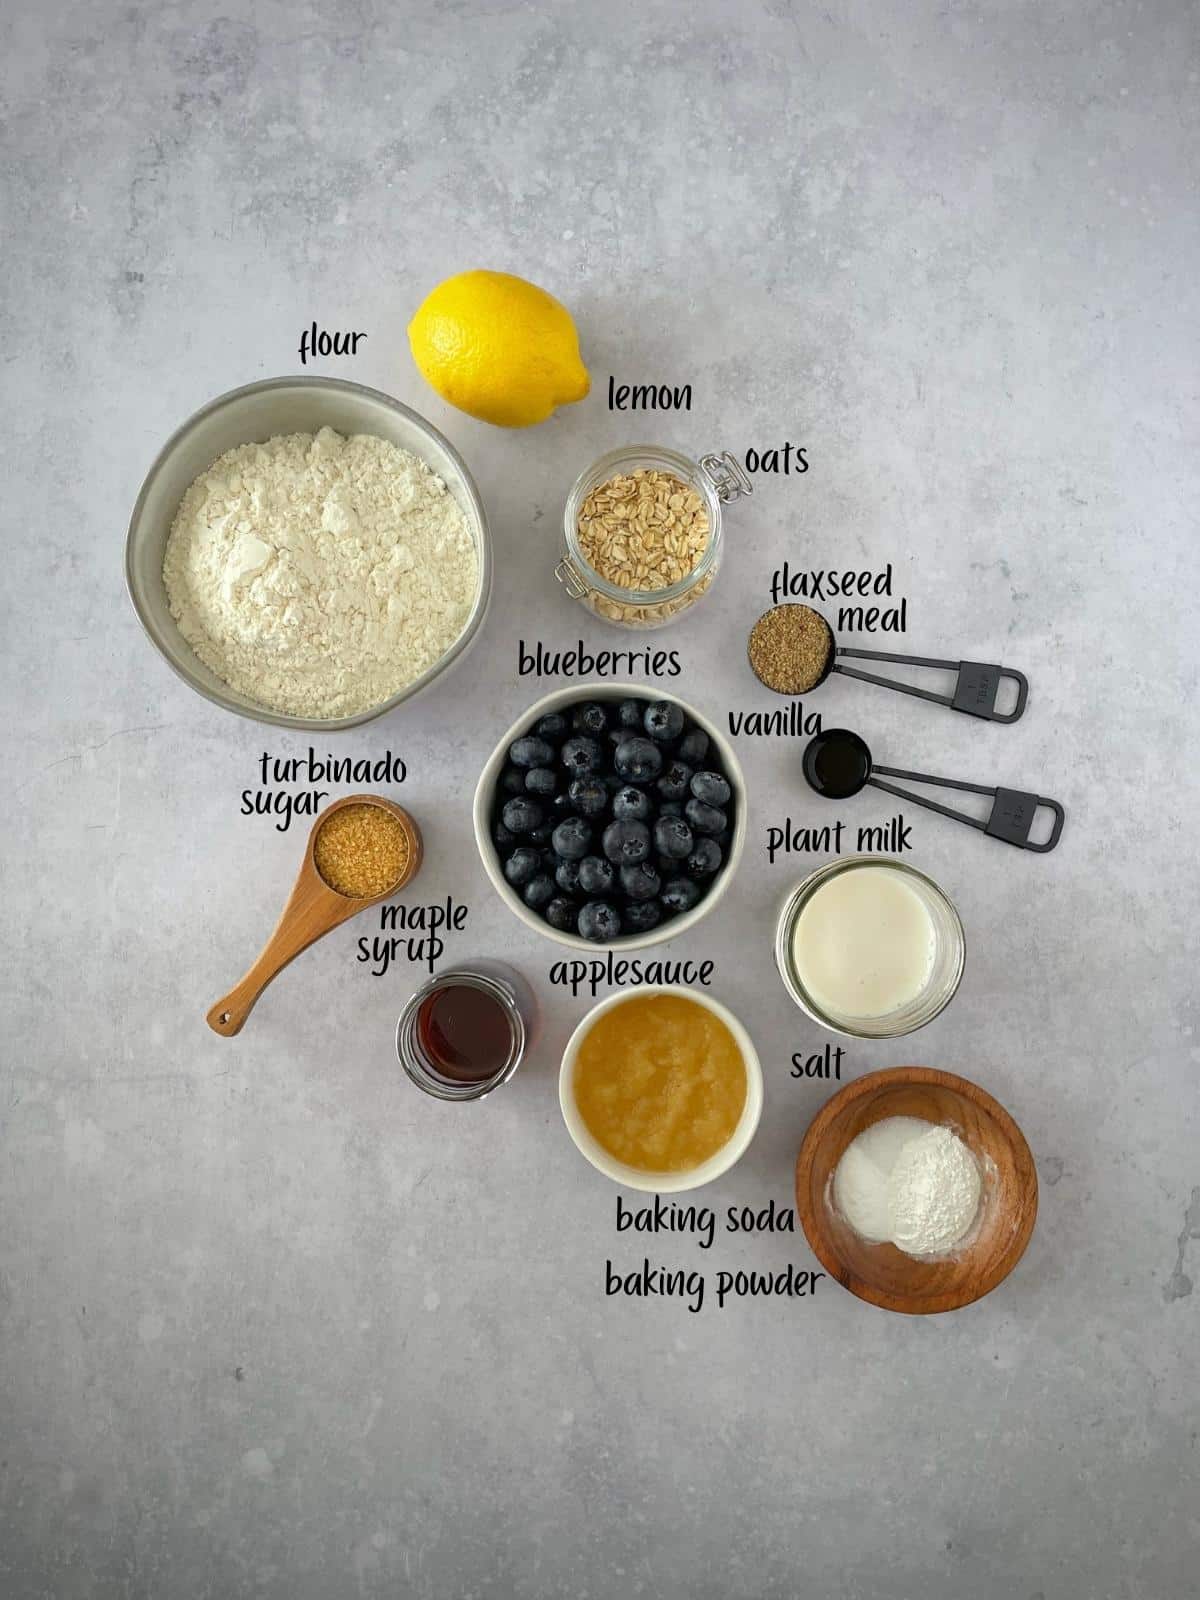 Labeled muffin ingredients.